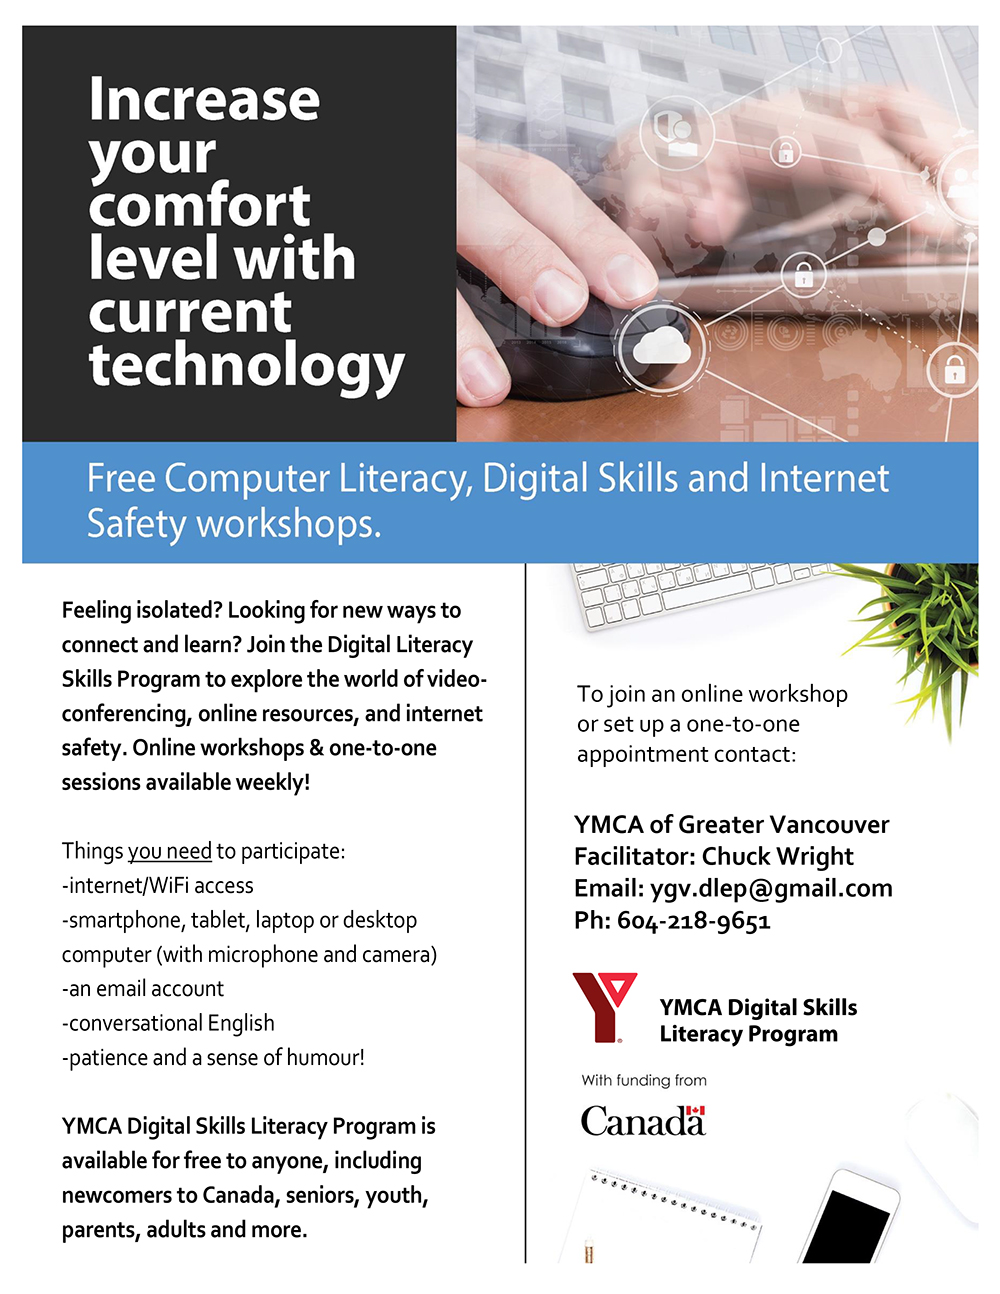 Poster for digital literacy workshop showing hands using a mouse